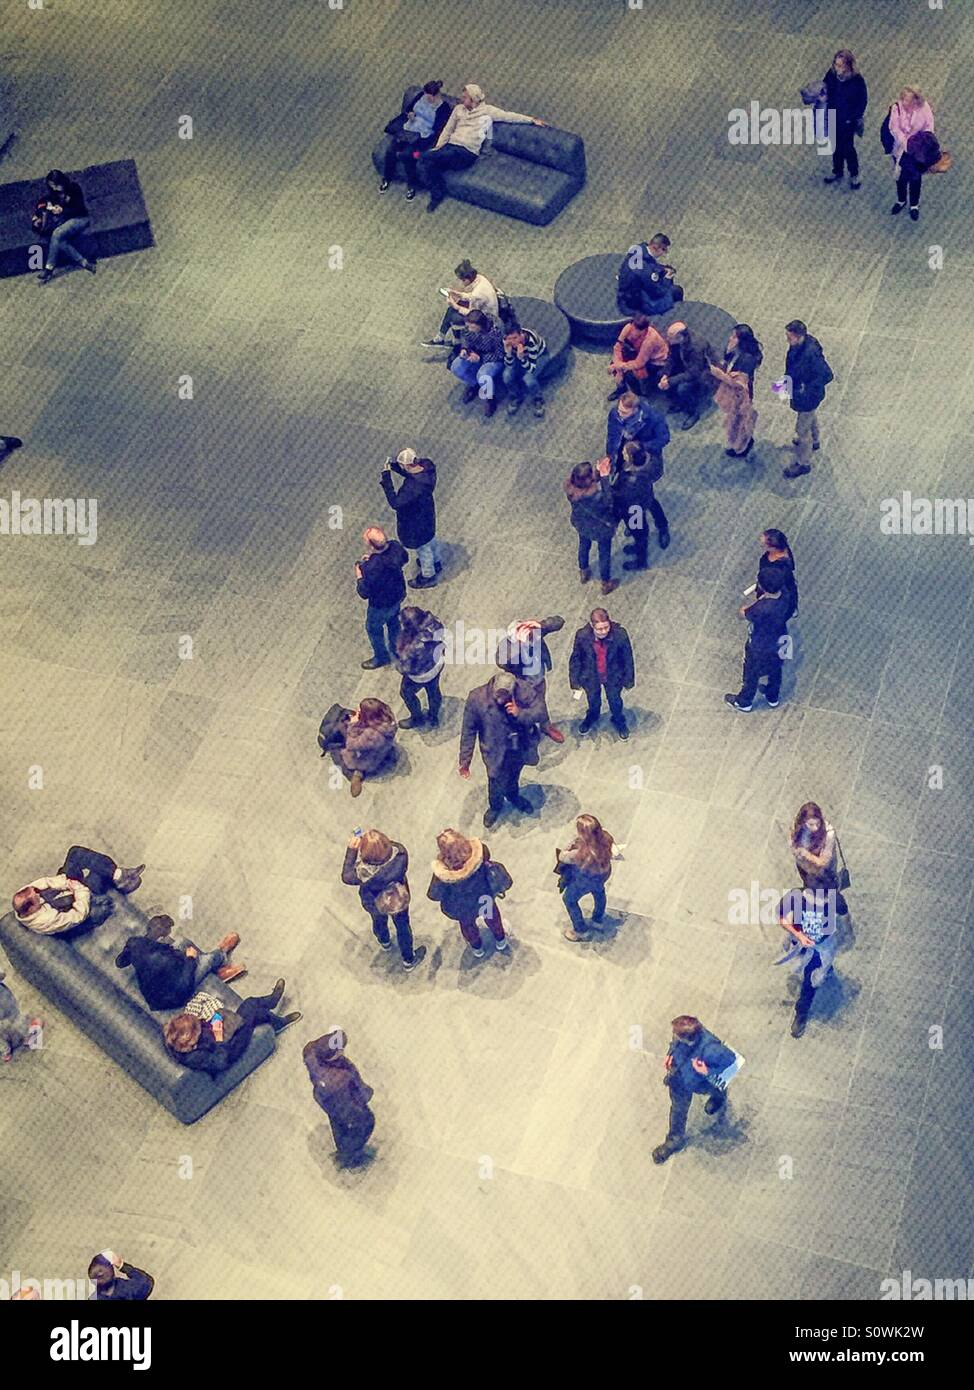 People gathered in a museum atrium shot from above Stock Photo